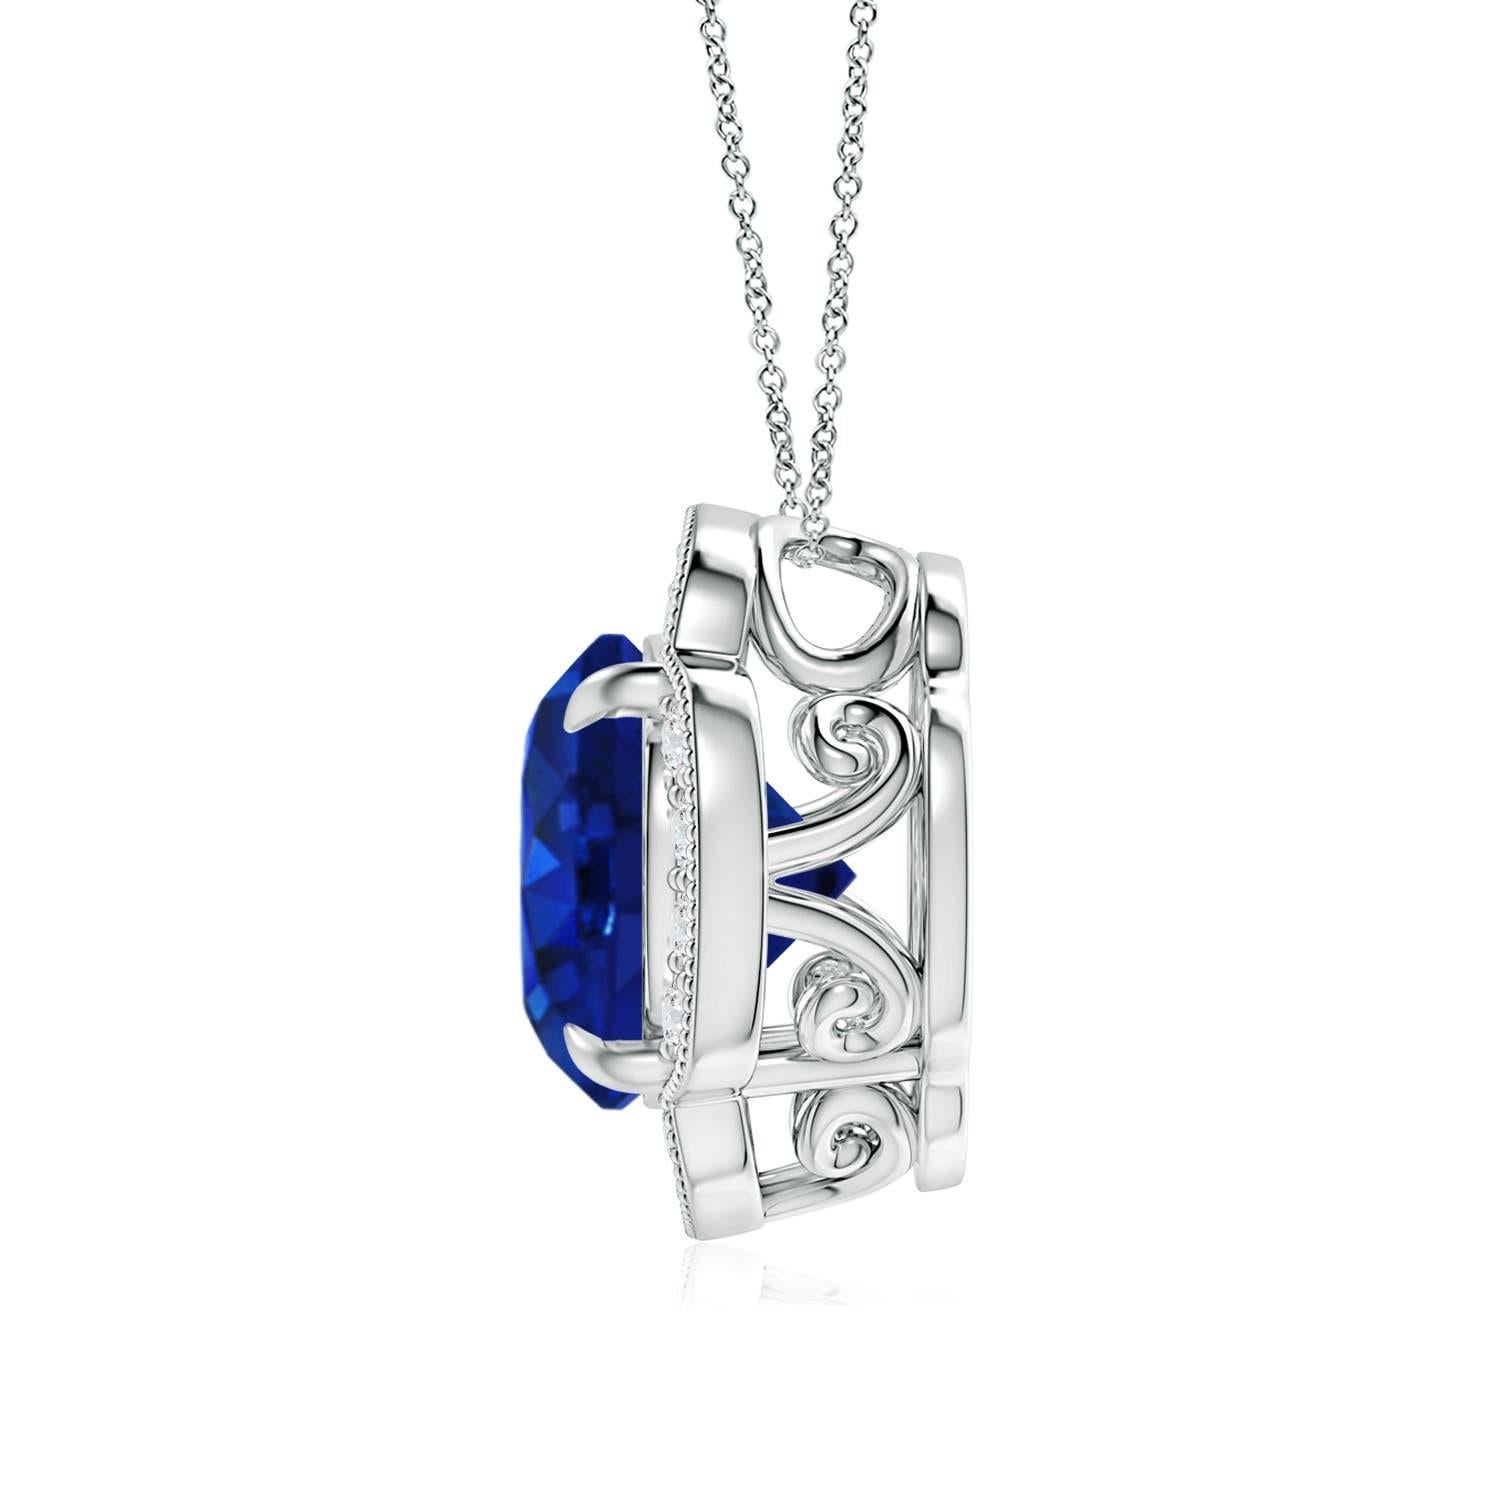 The GIA certified blue sapphire clover pendant appears to be floating on the cable chain. Secured in a claw setting, the blue sapphire is surrounded by a floral halo of dazzling round diamonds. This alluring round sapphire clover pendant is designed